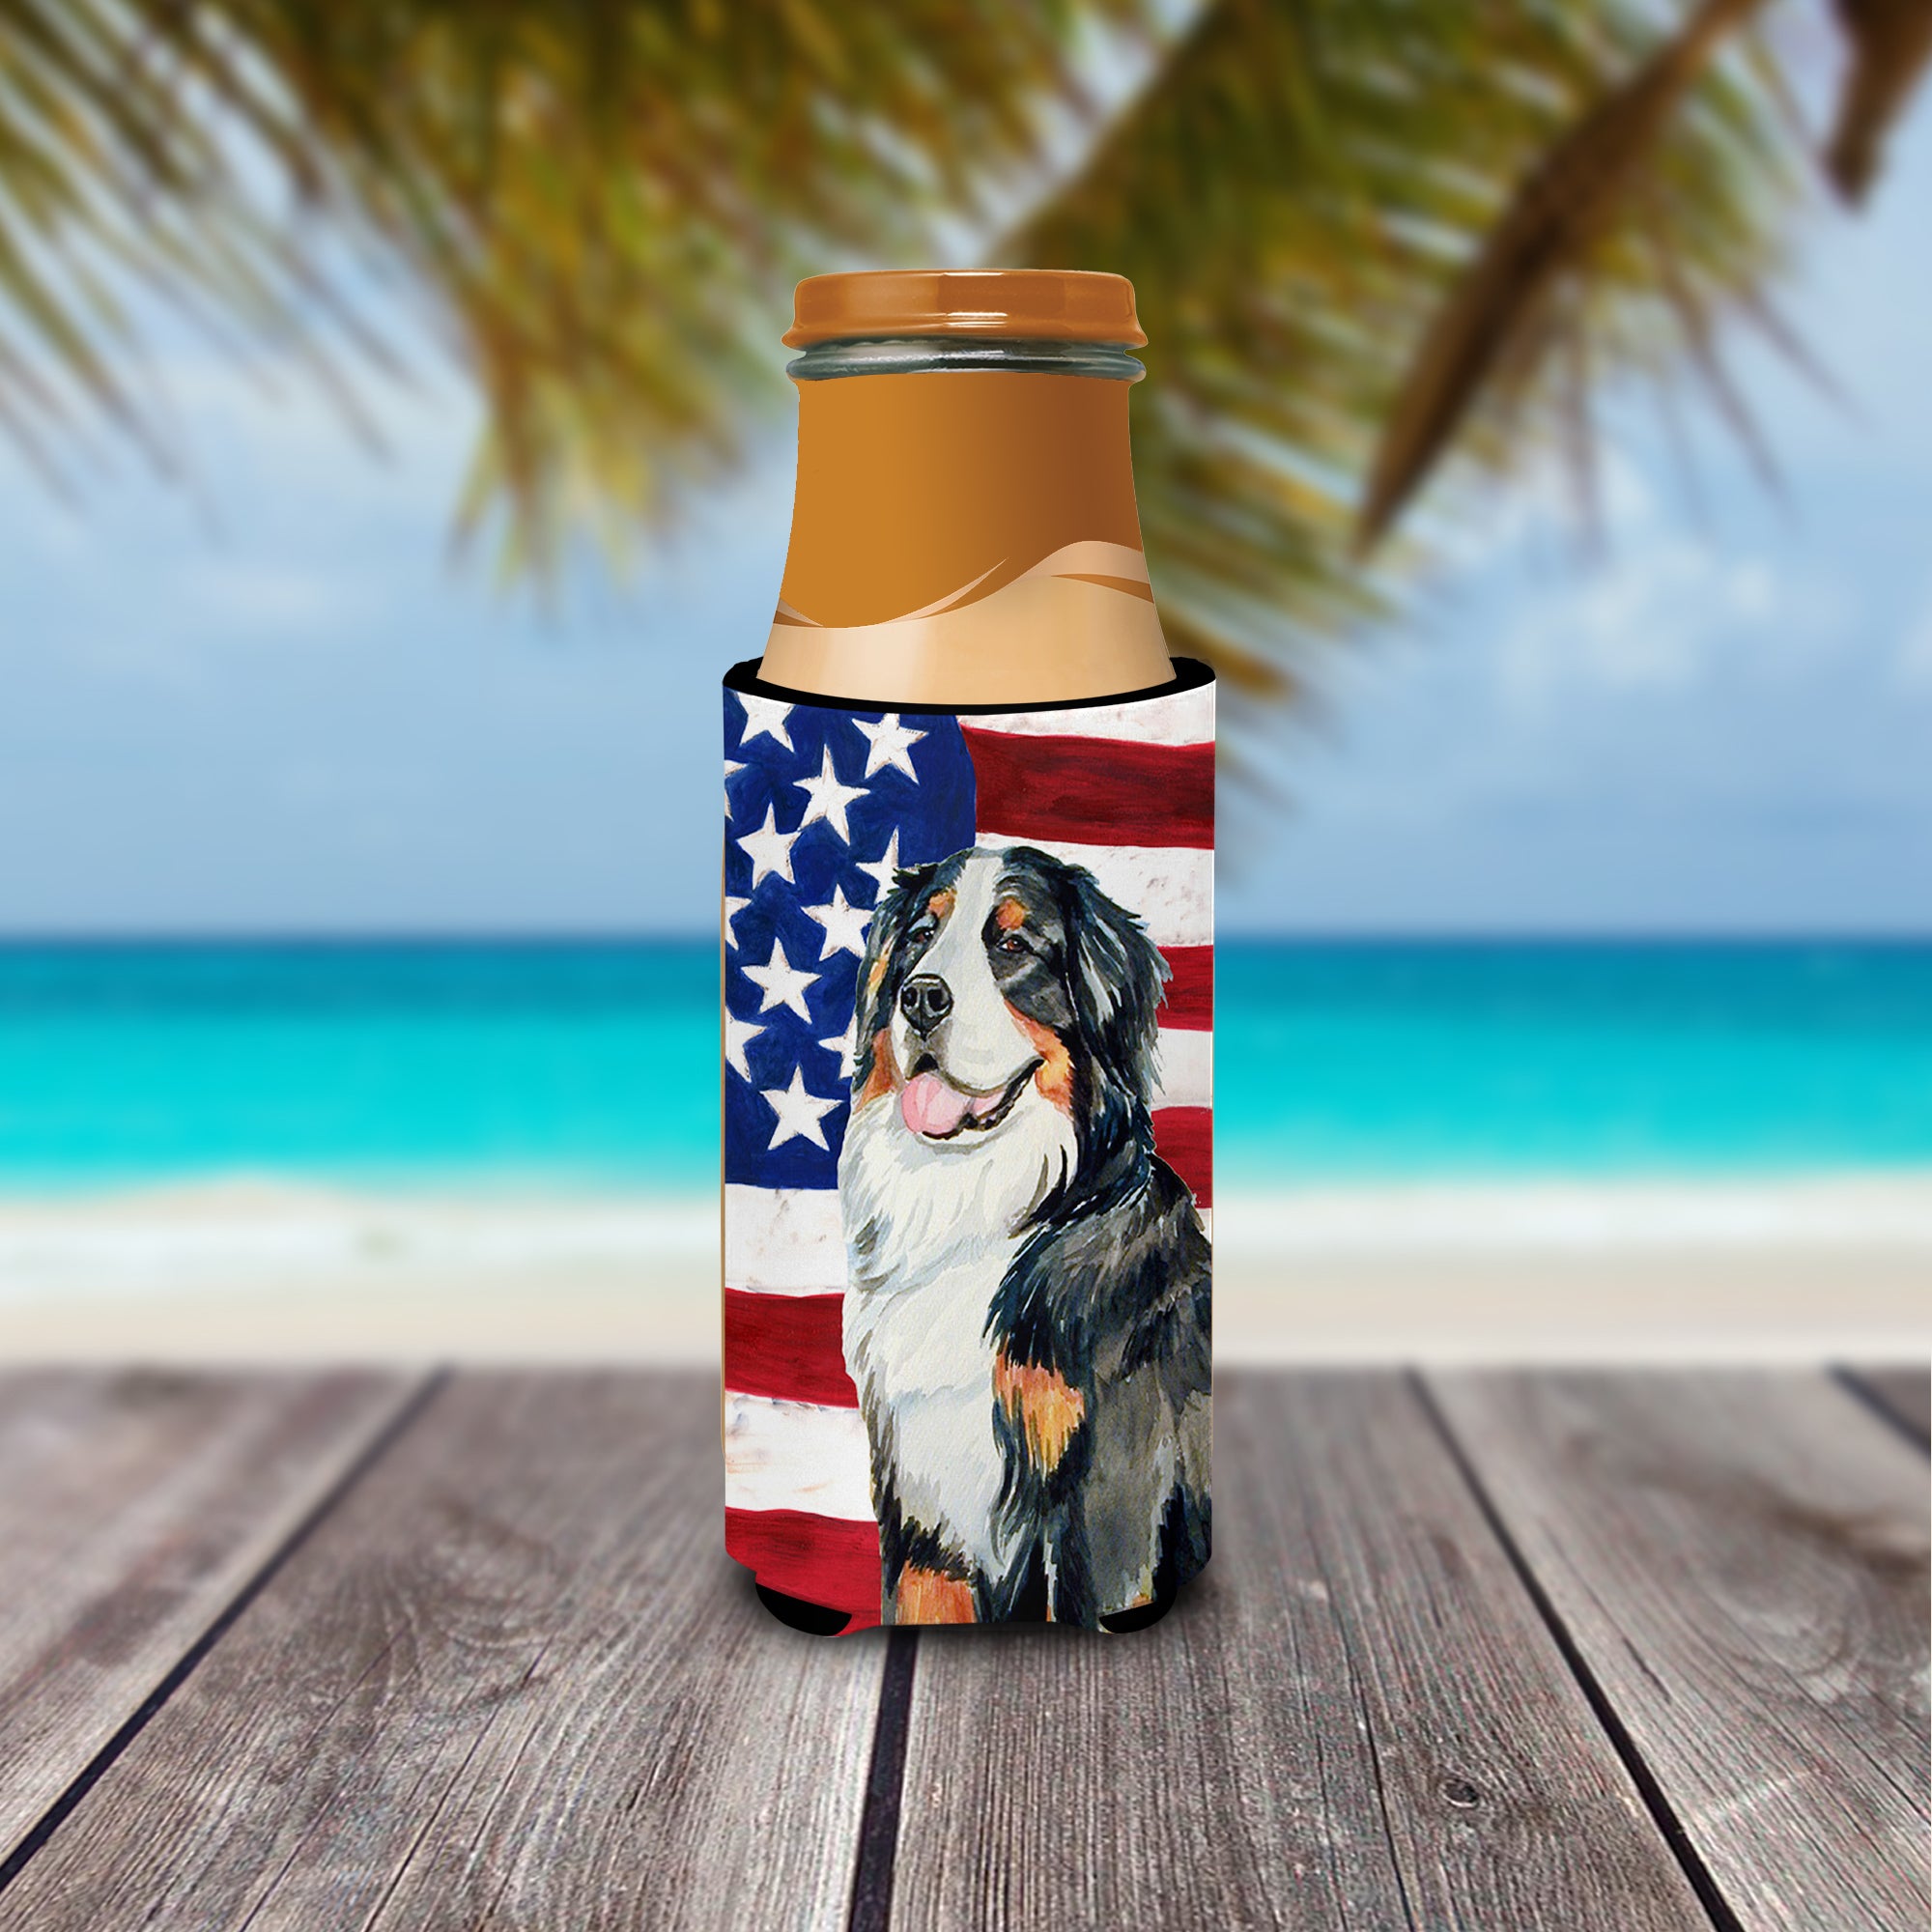 USA American Flag with Bernese Mountain Dog Ultra Beverage Insulators for slim cans LH9003MUK.